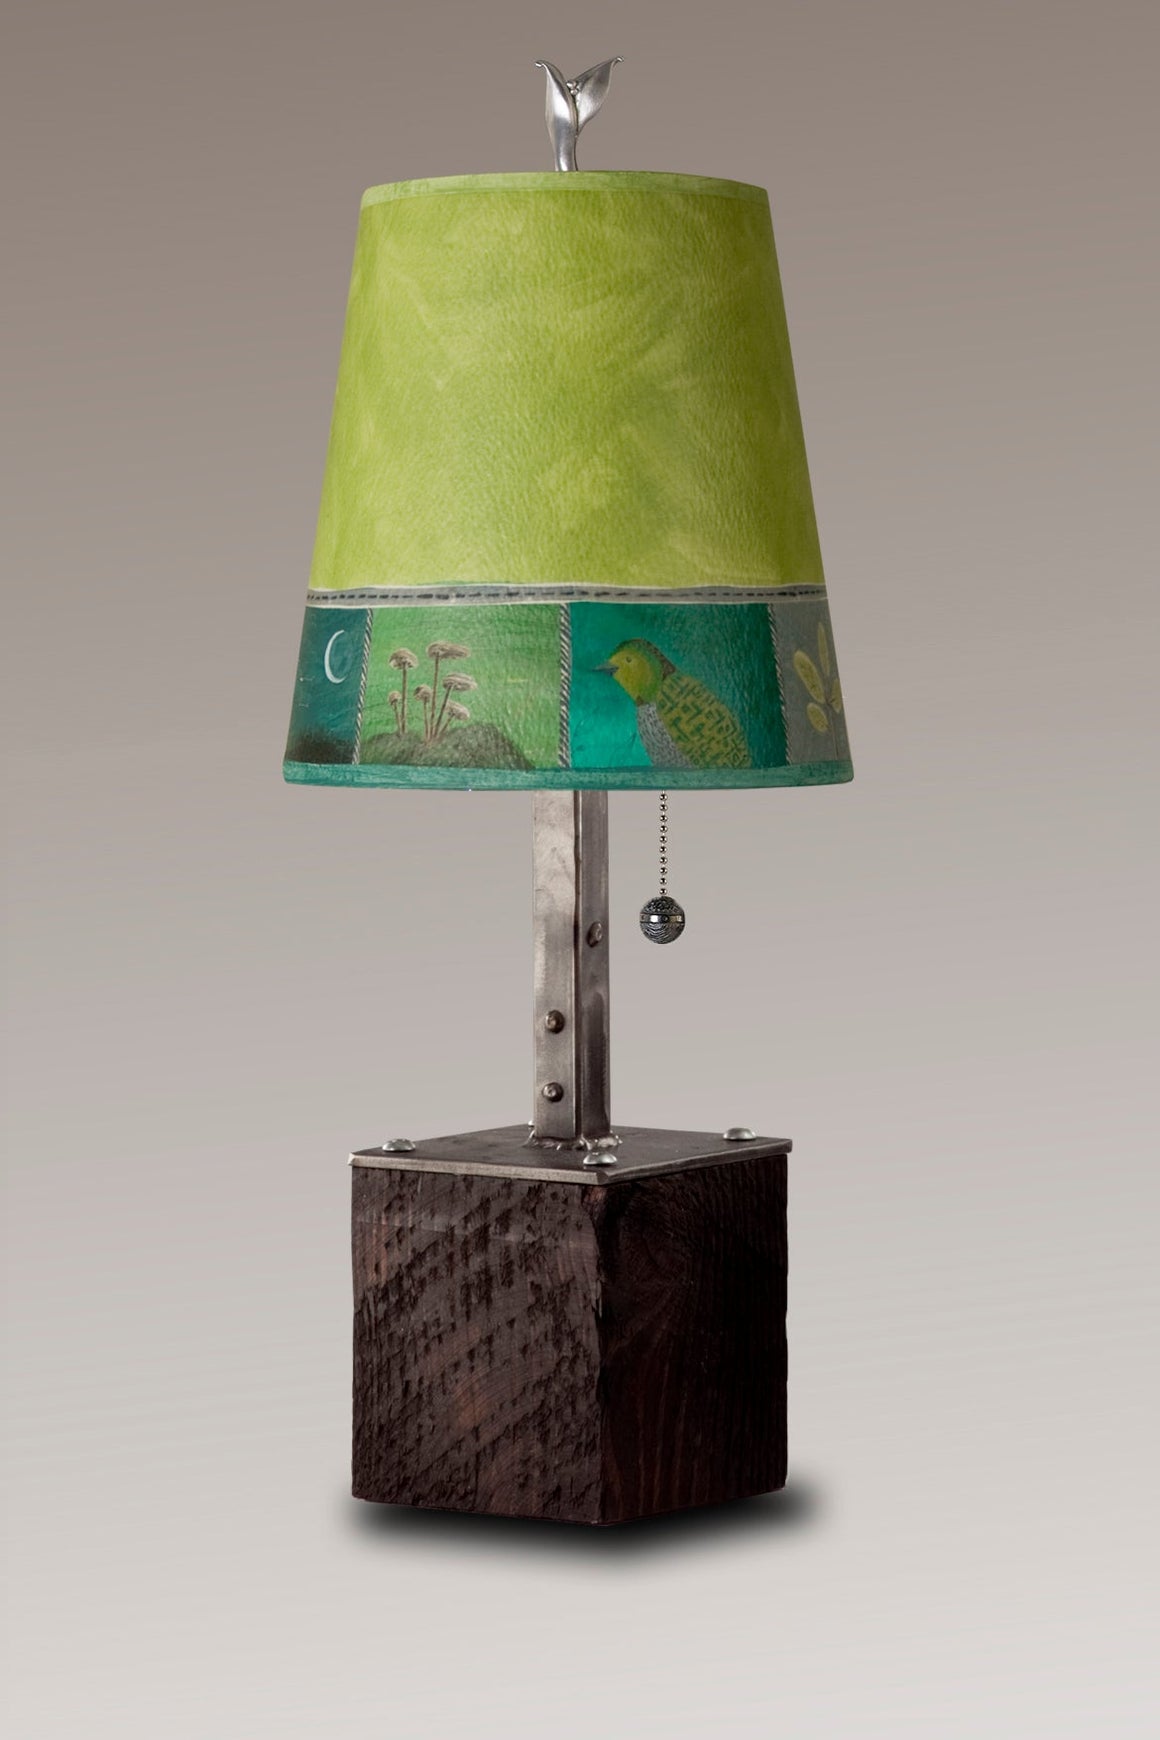 Steel Table Lamp on Reclaimed Wood with Small Drum Shade in Woodland Trails in Leaf